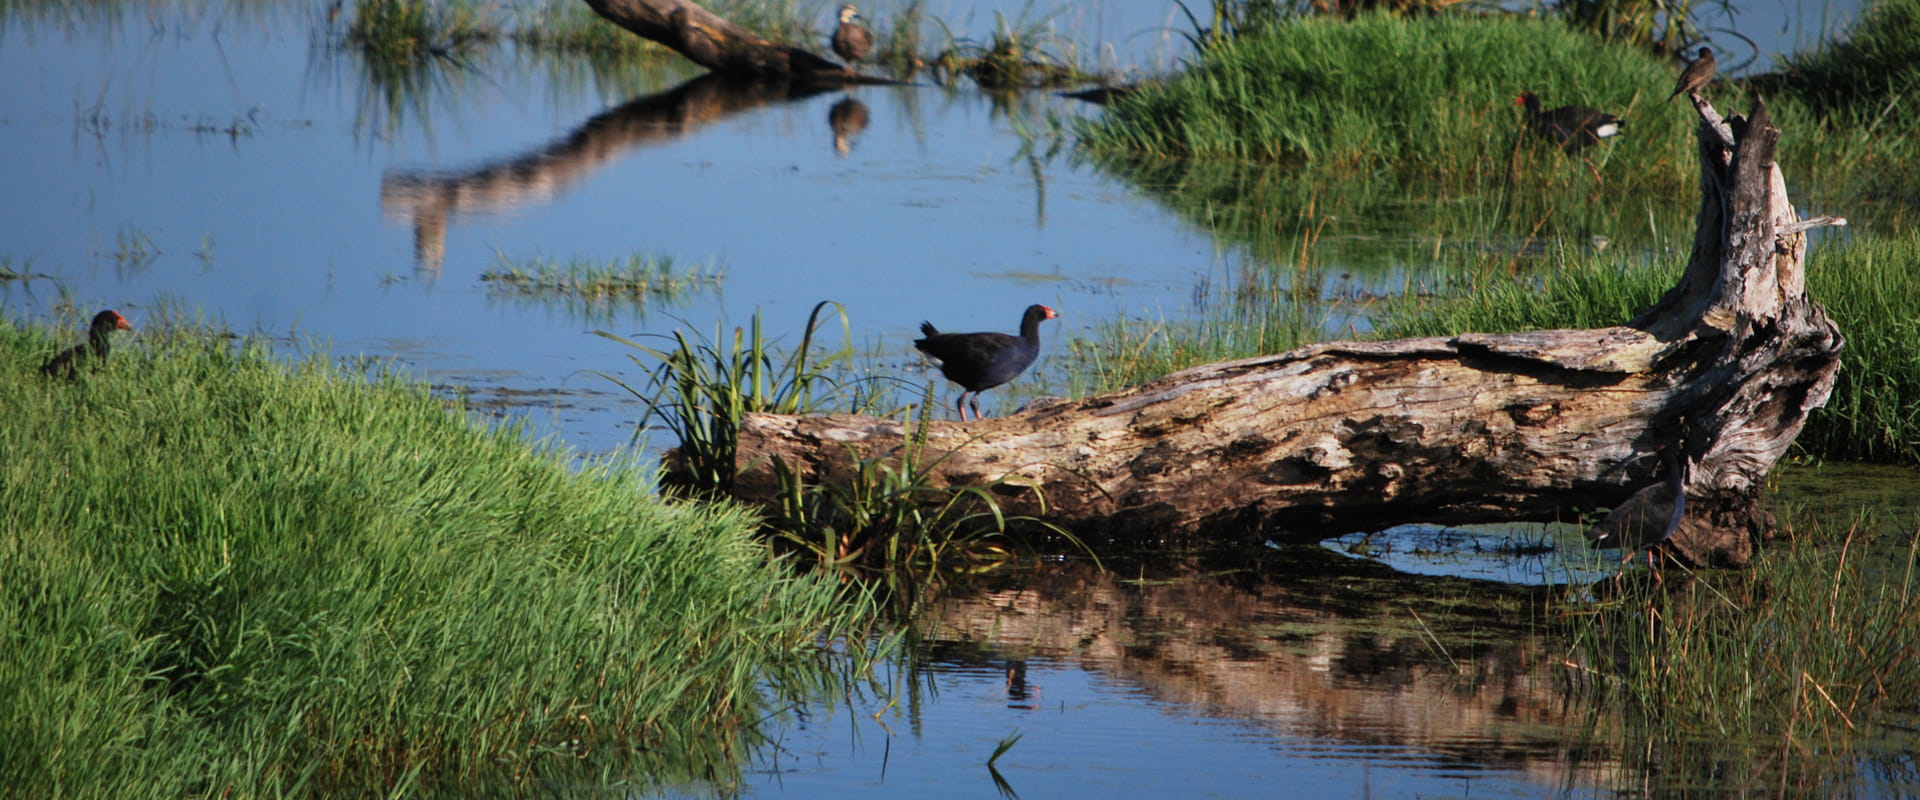 Native birdlife surrounds a large log that lies in a wetland area